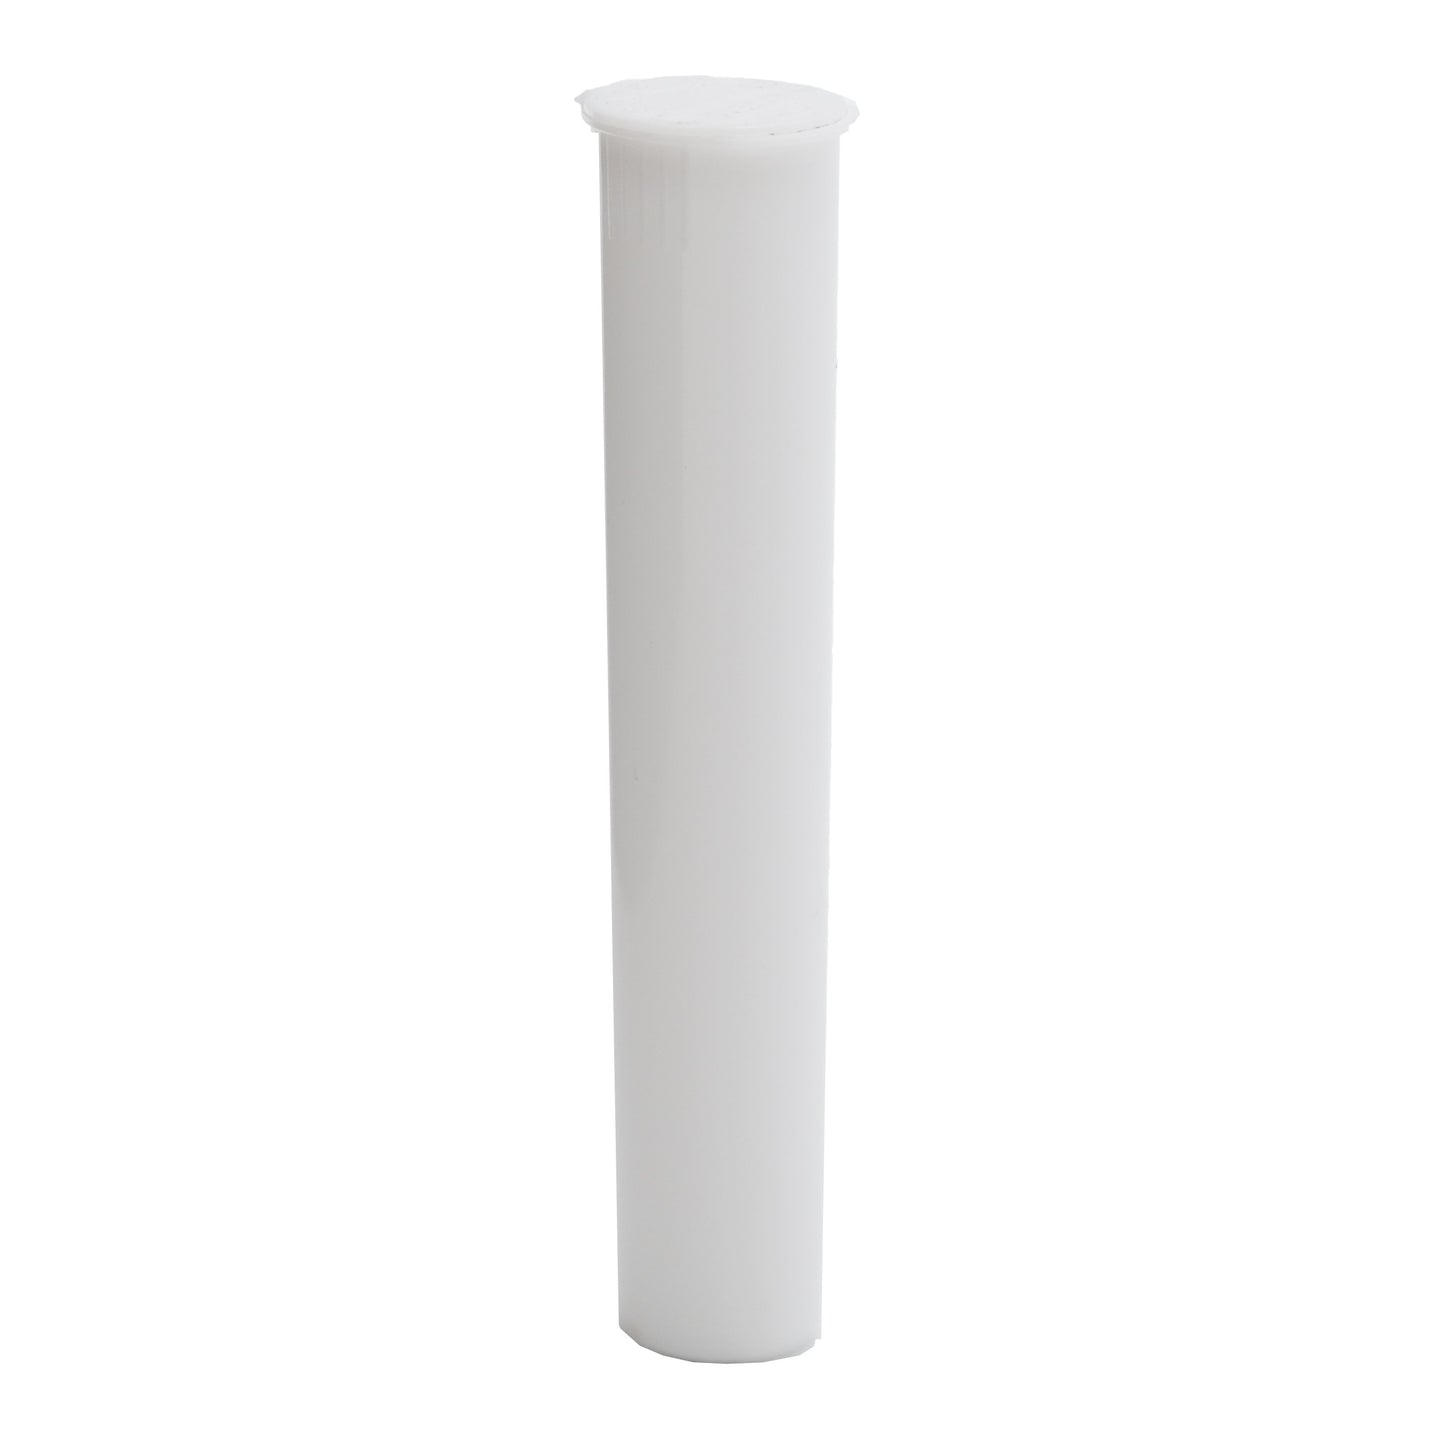 Brand King Squeeze Pop Top Plastic Tube for Cartridge (85mm)